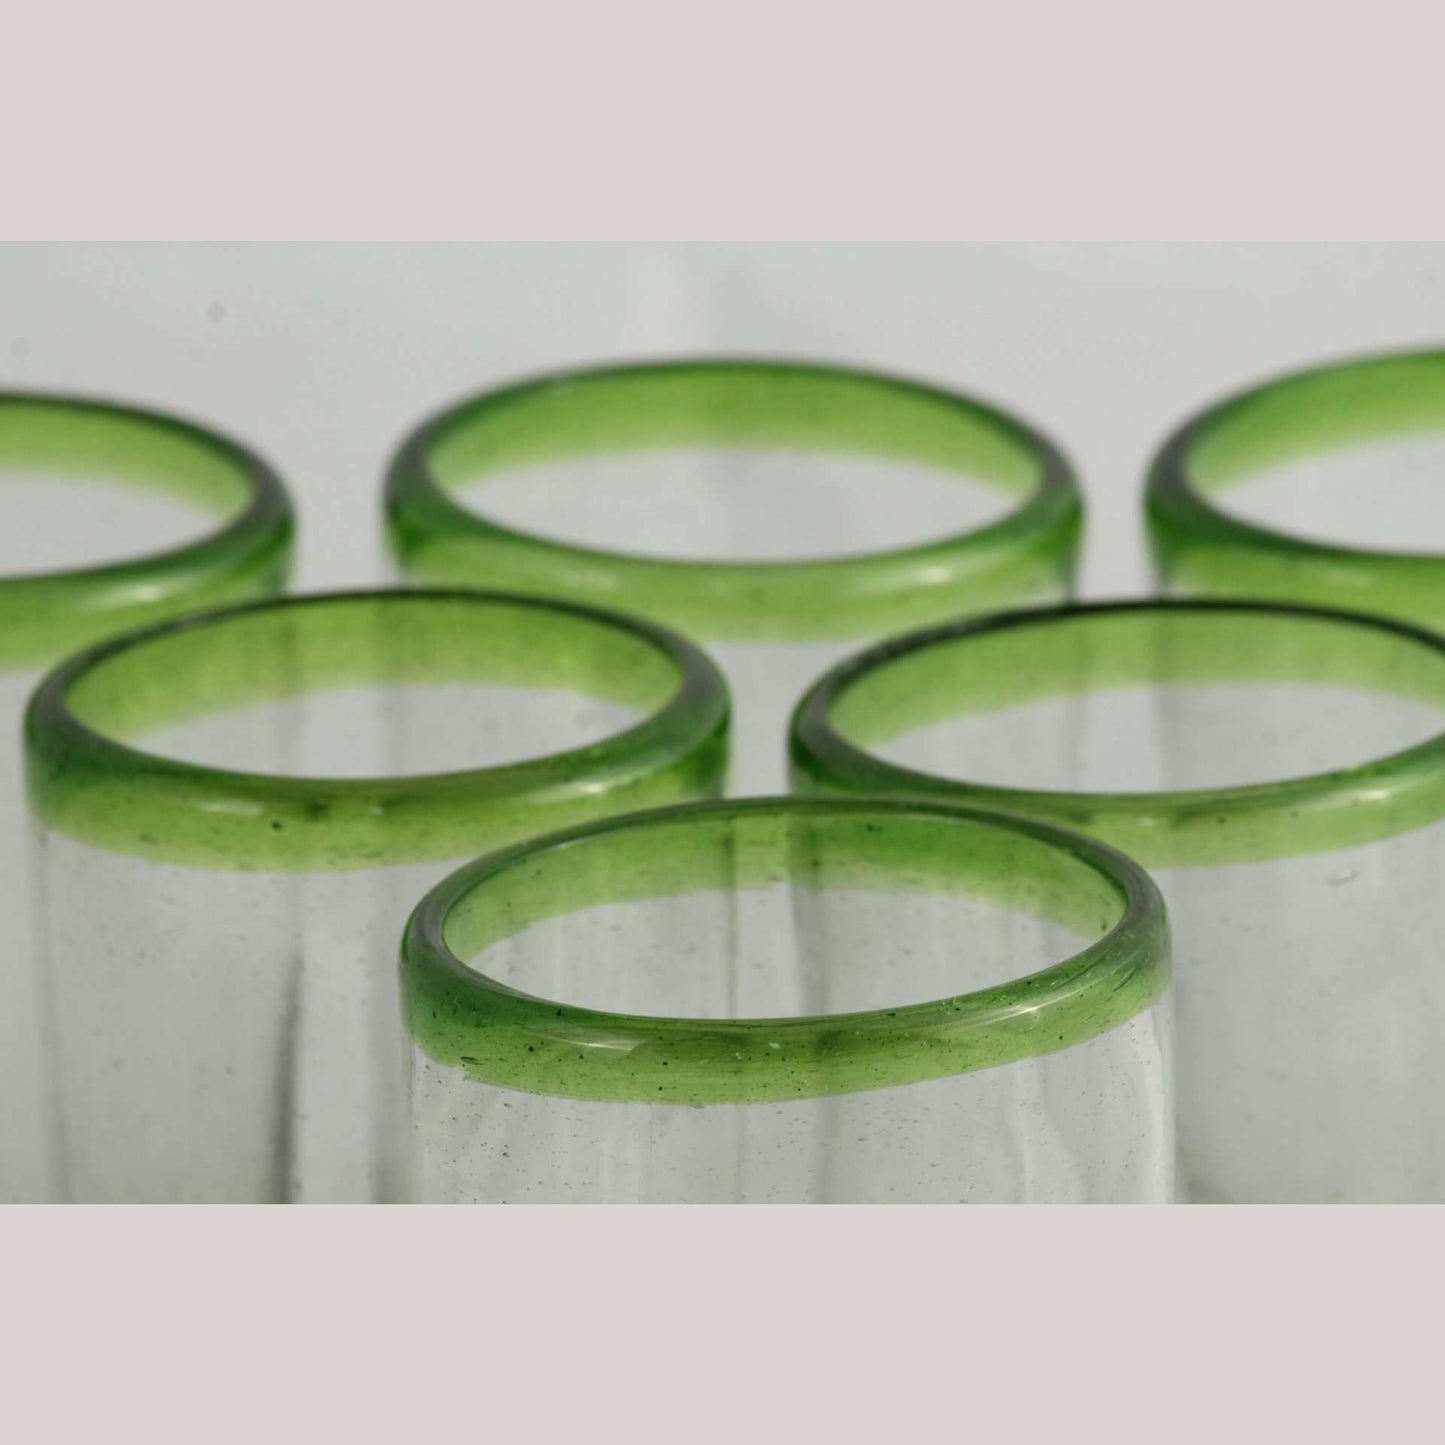 Lime Green Rim, Glass Tumblers, Set of 6, Hand Crafted Mexican Glassware